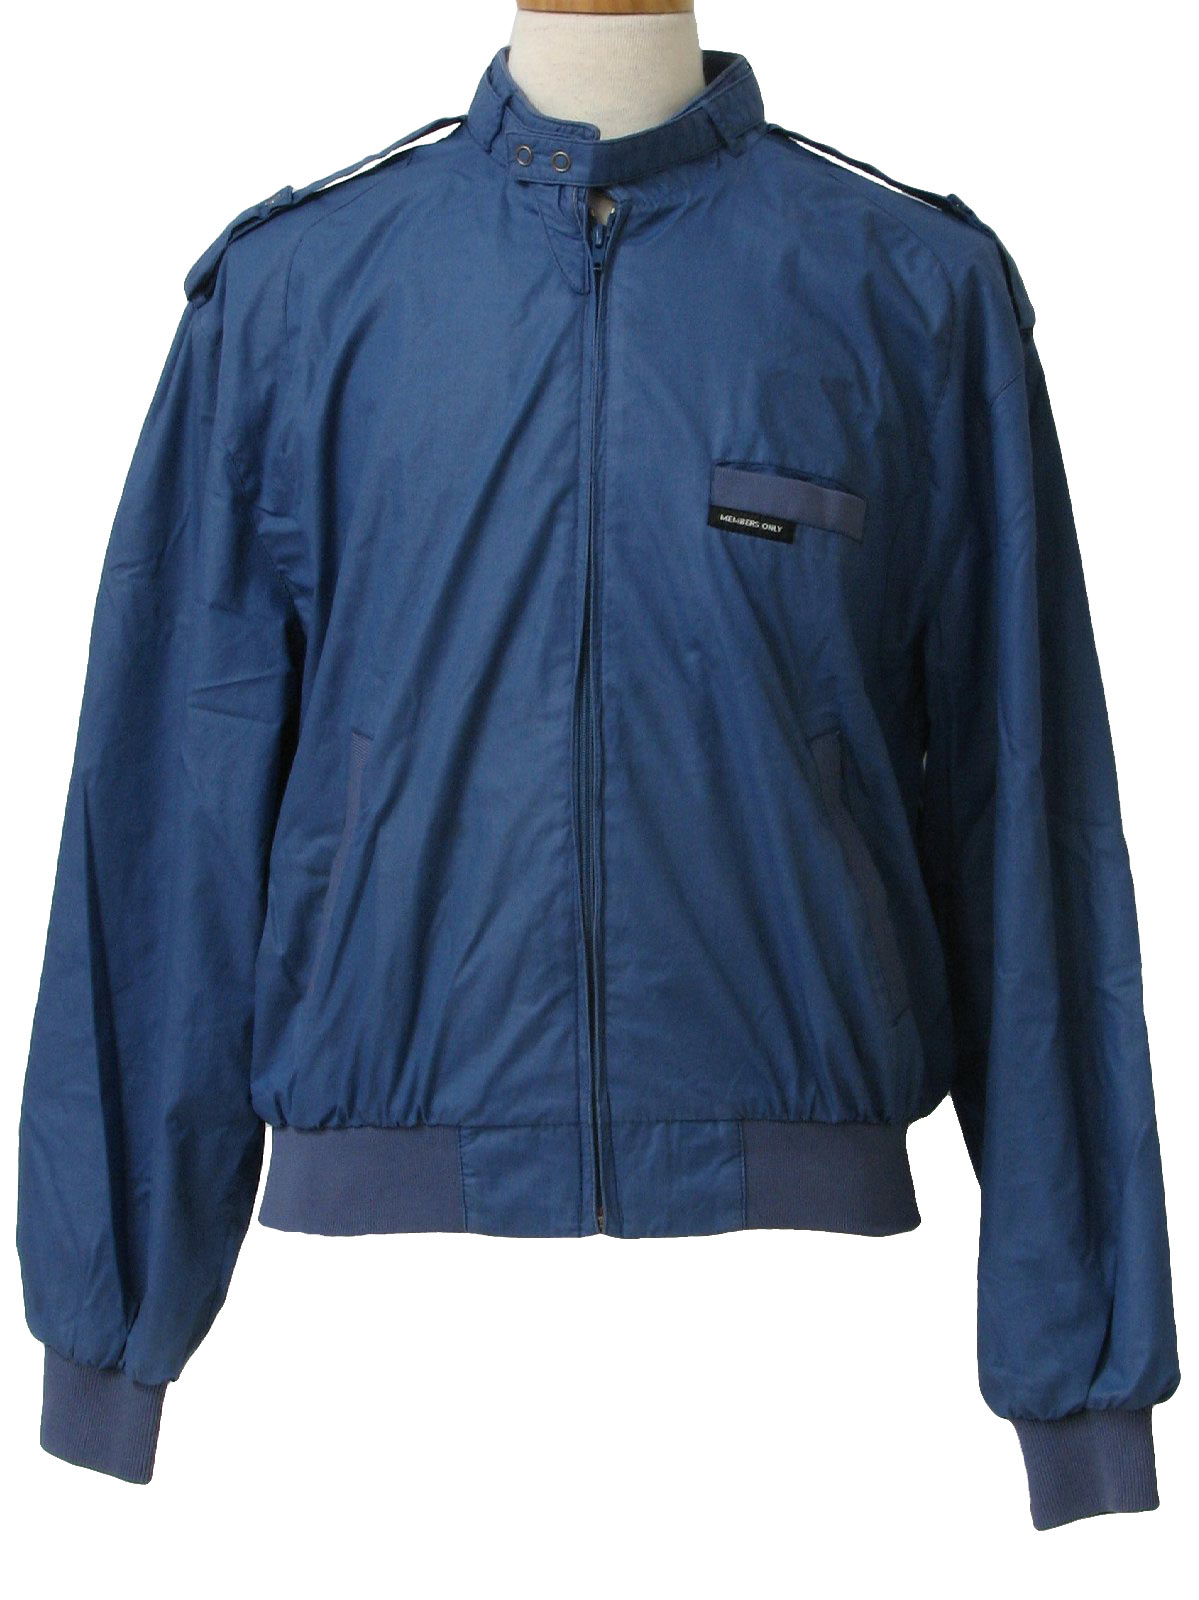 80s Retro Jacket: 80s -Members Only- Mens medium blue cotton and ...